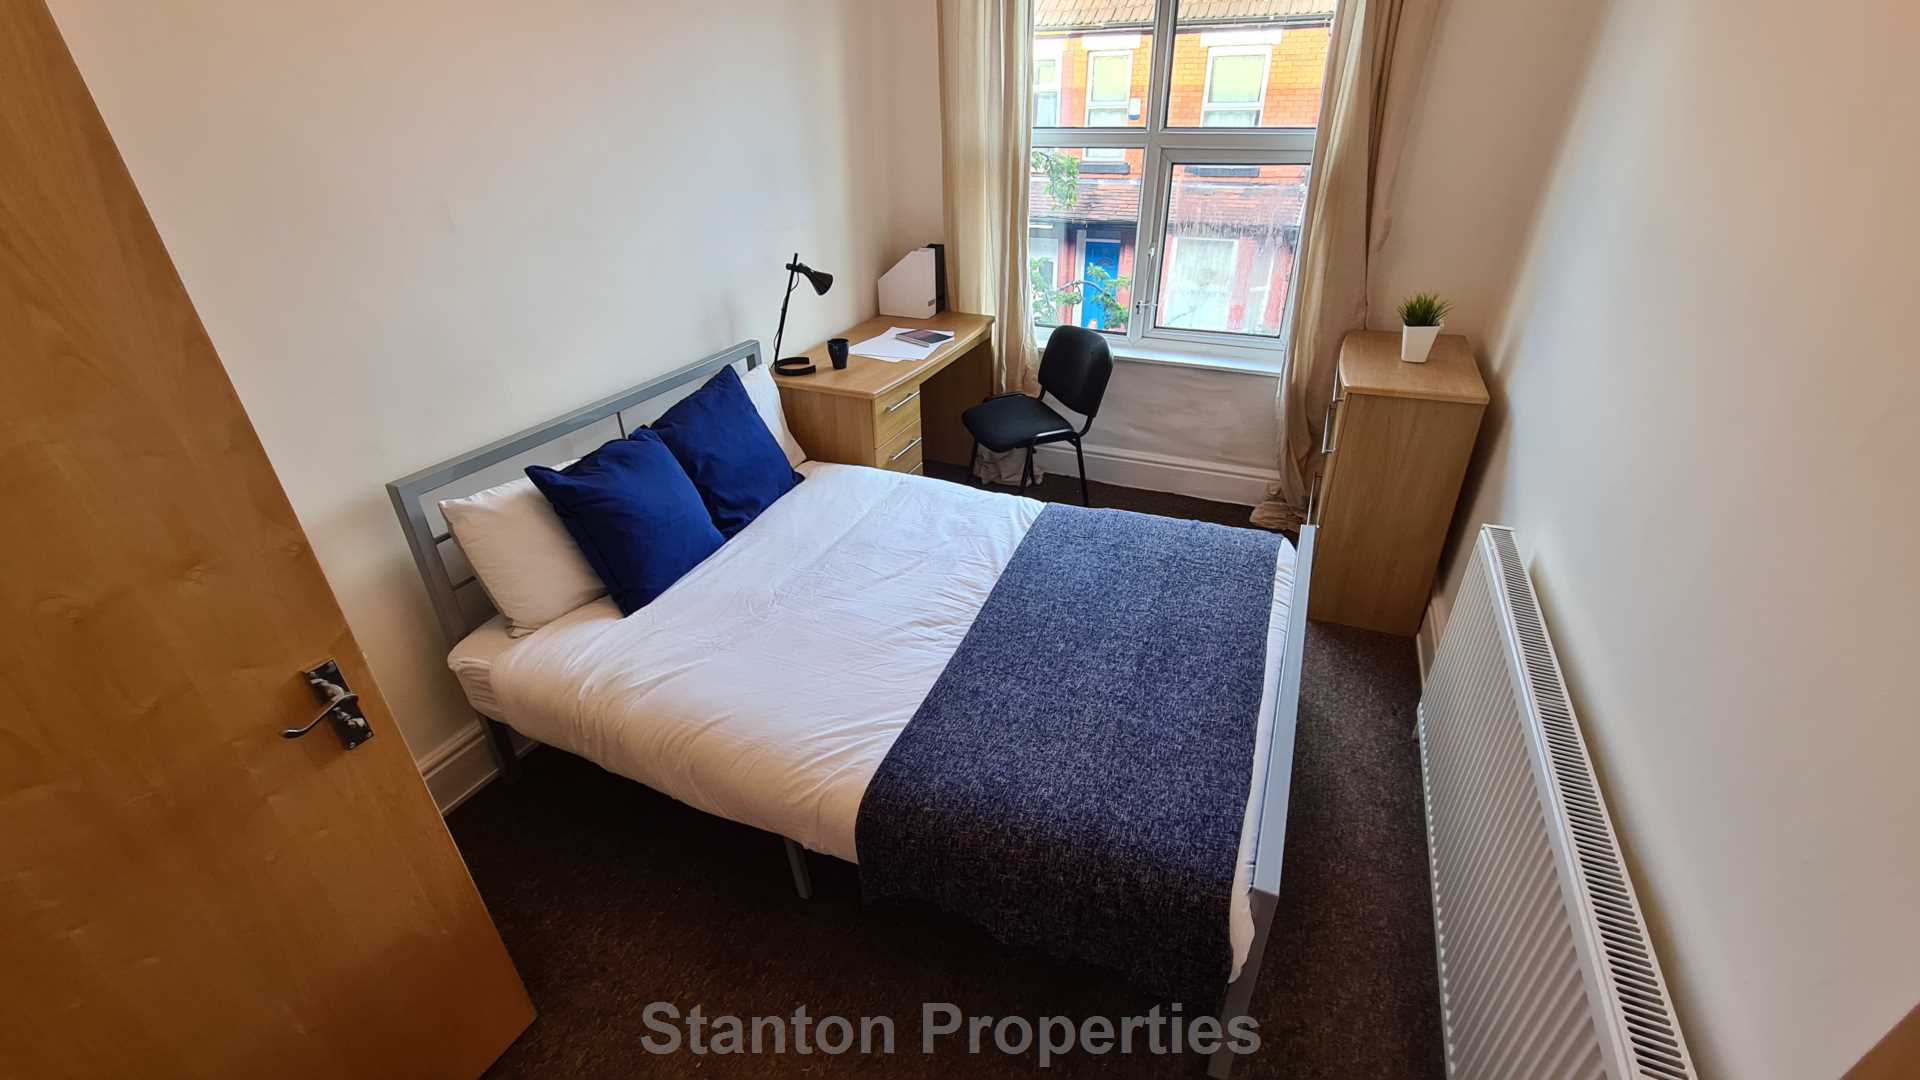 See Video Tour, £130 pppw, Albion Road, Manchester, Image 8